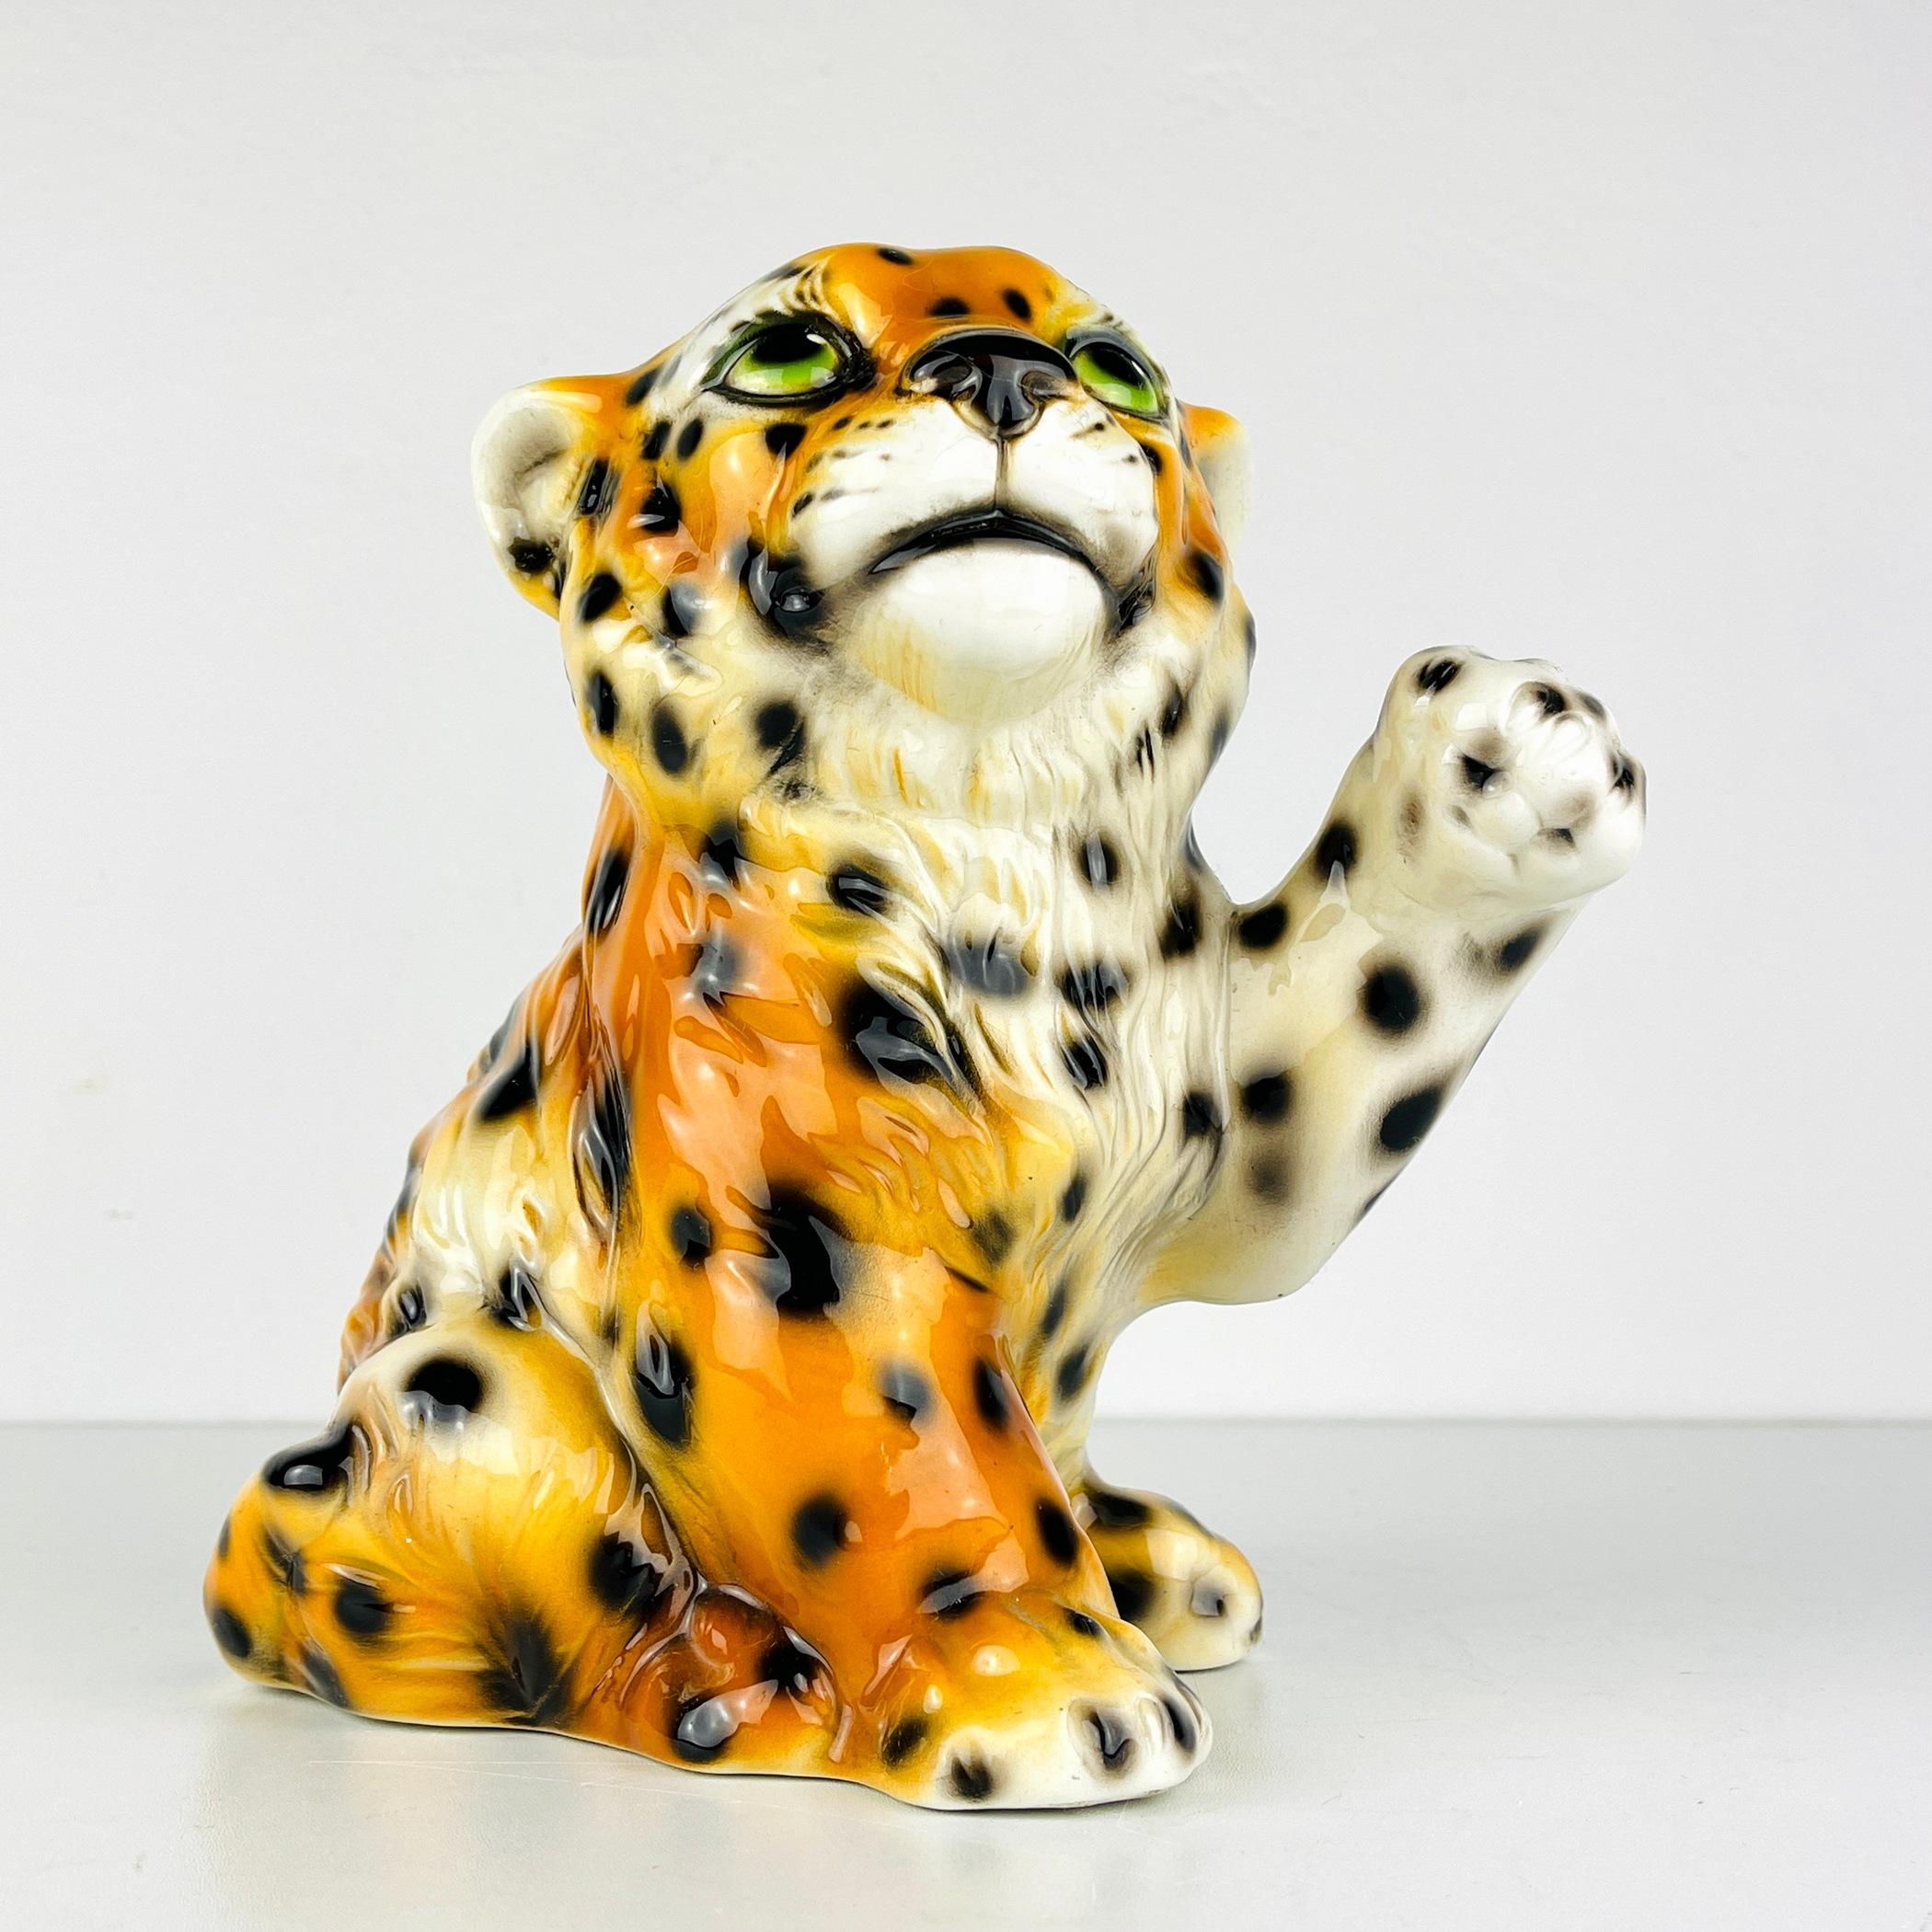 Beautiful cute leopard made in Italy in the 1960s from glazed ceramics. In very good vintage condition, no damage. It will undoubtedly decorate your home or office. Width: 18 centimeters Height: 21 centimeters Depth: 21 centimeters.